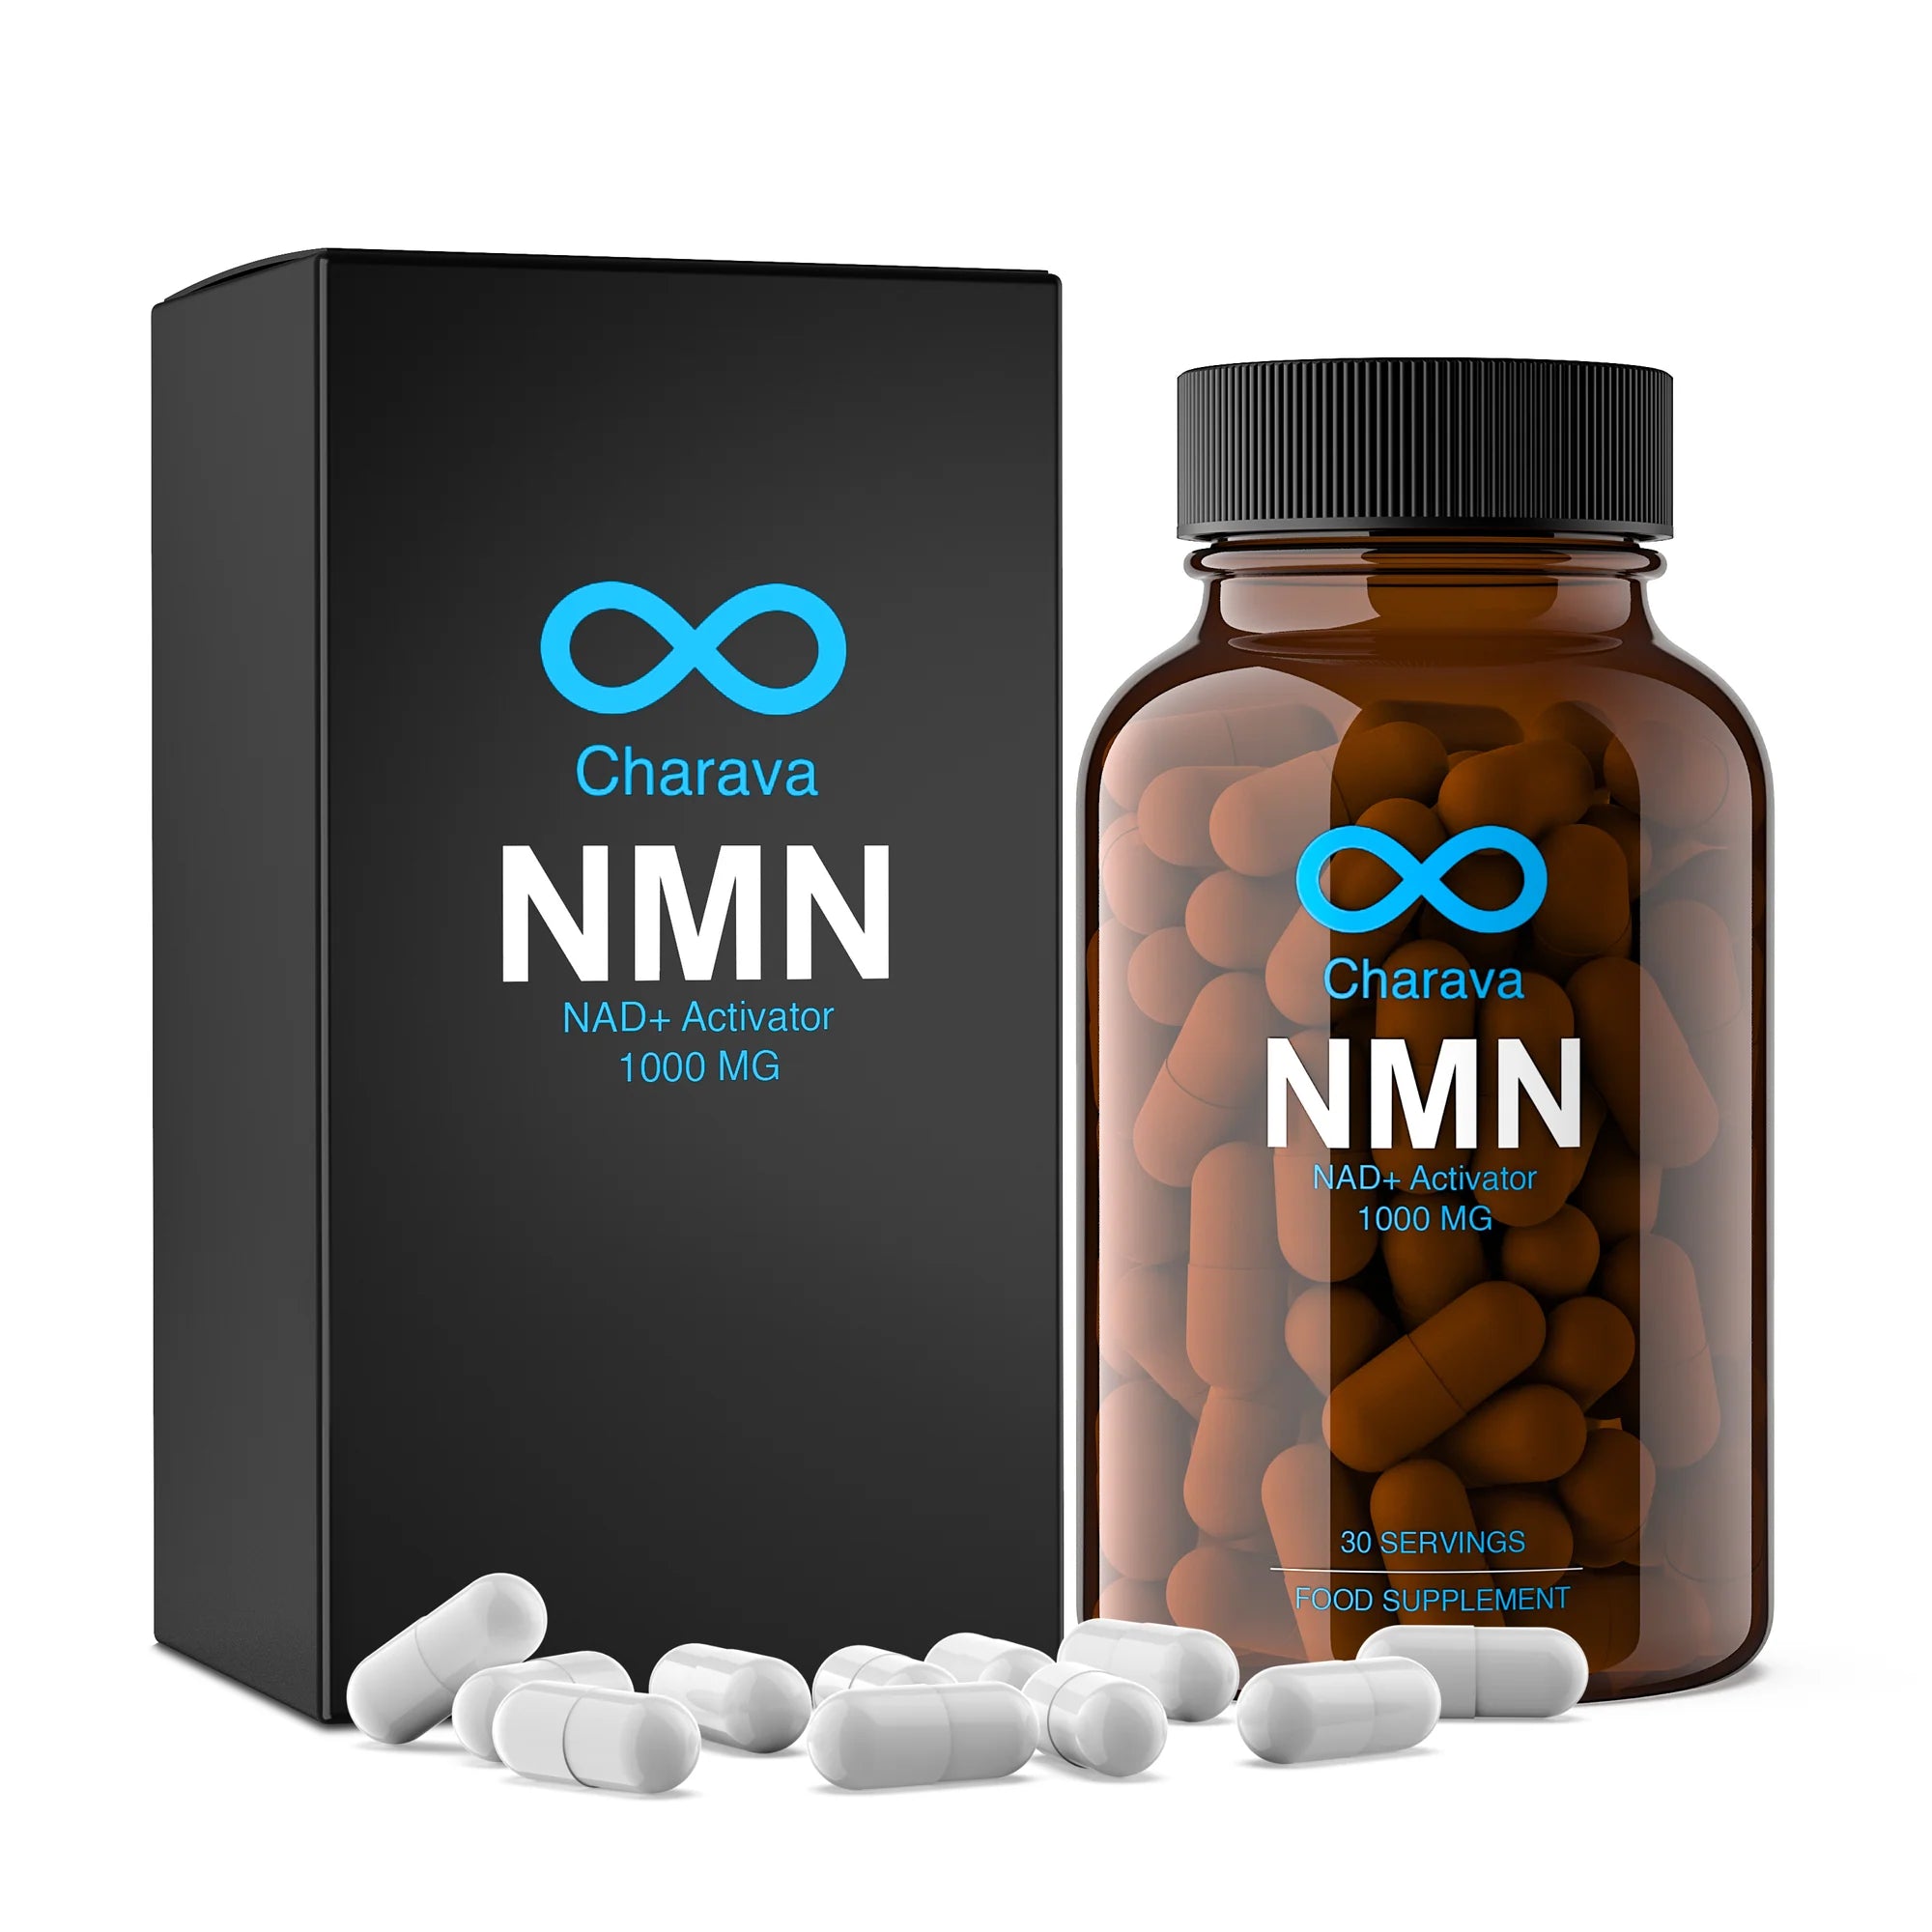 How to take NMN supplements